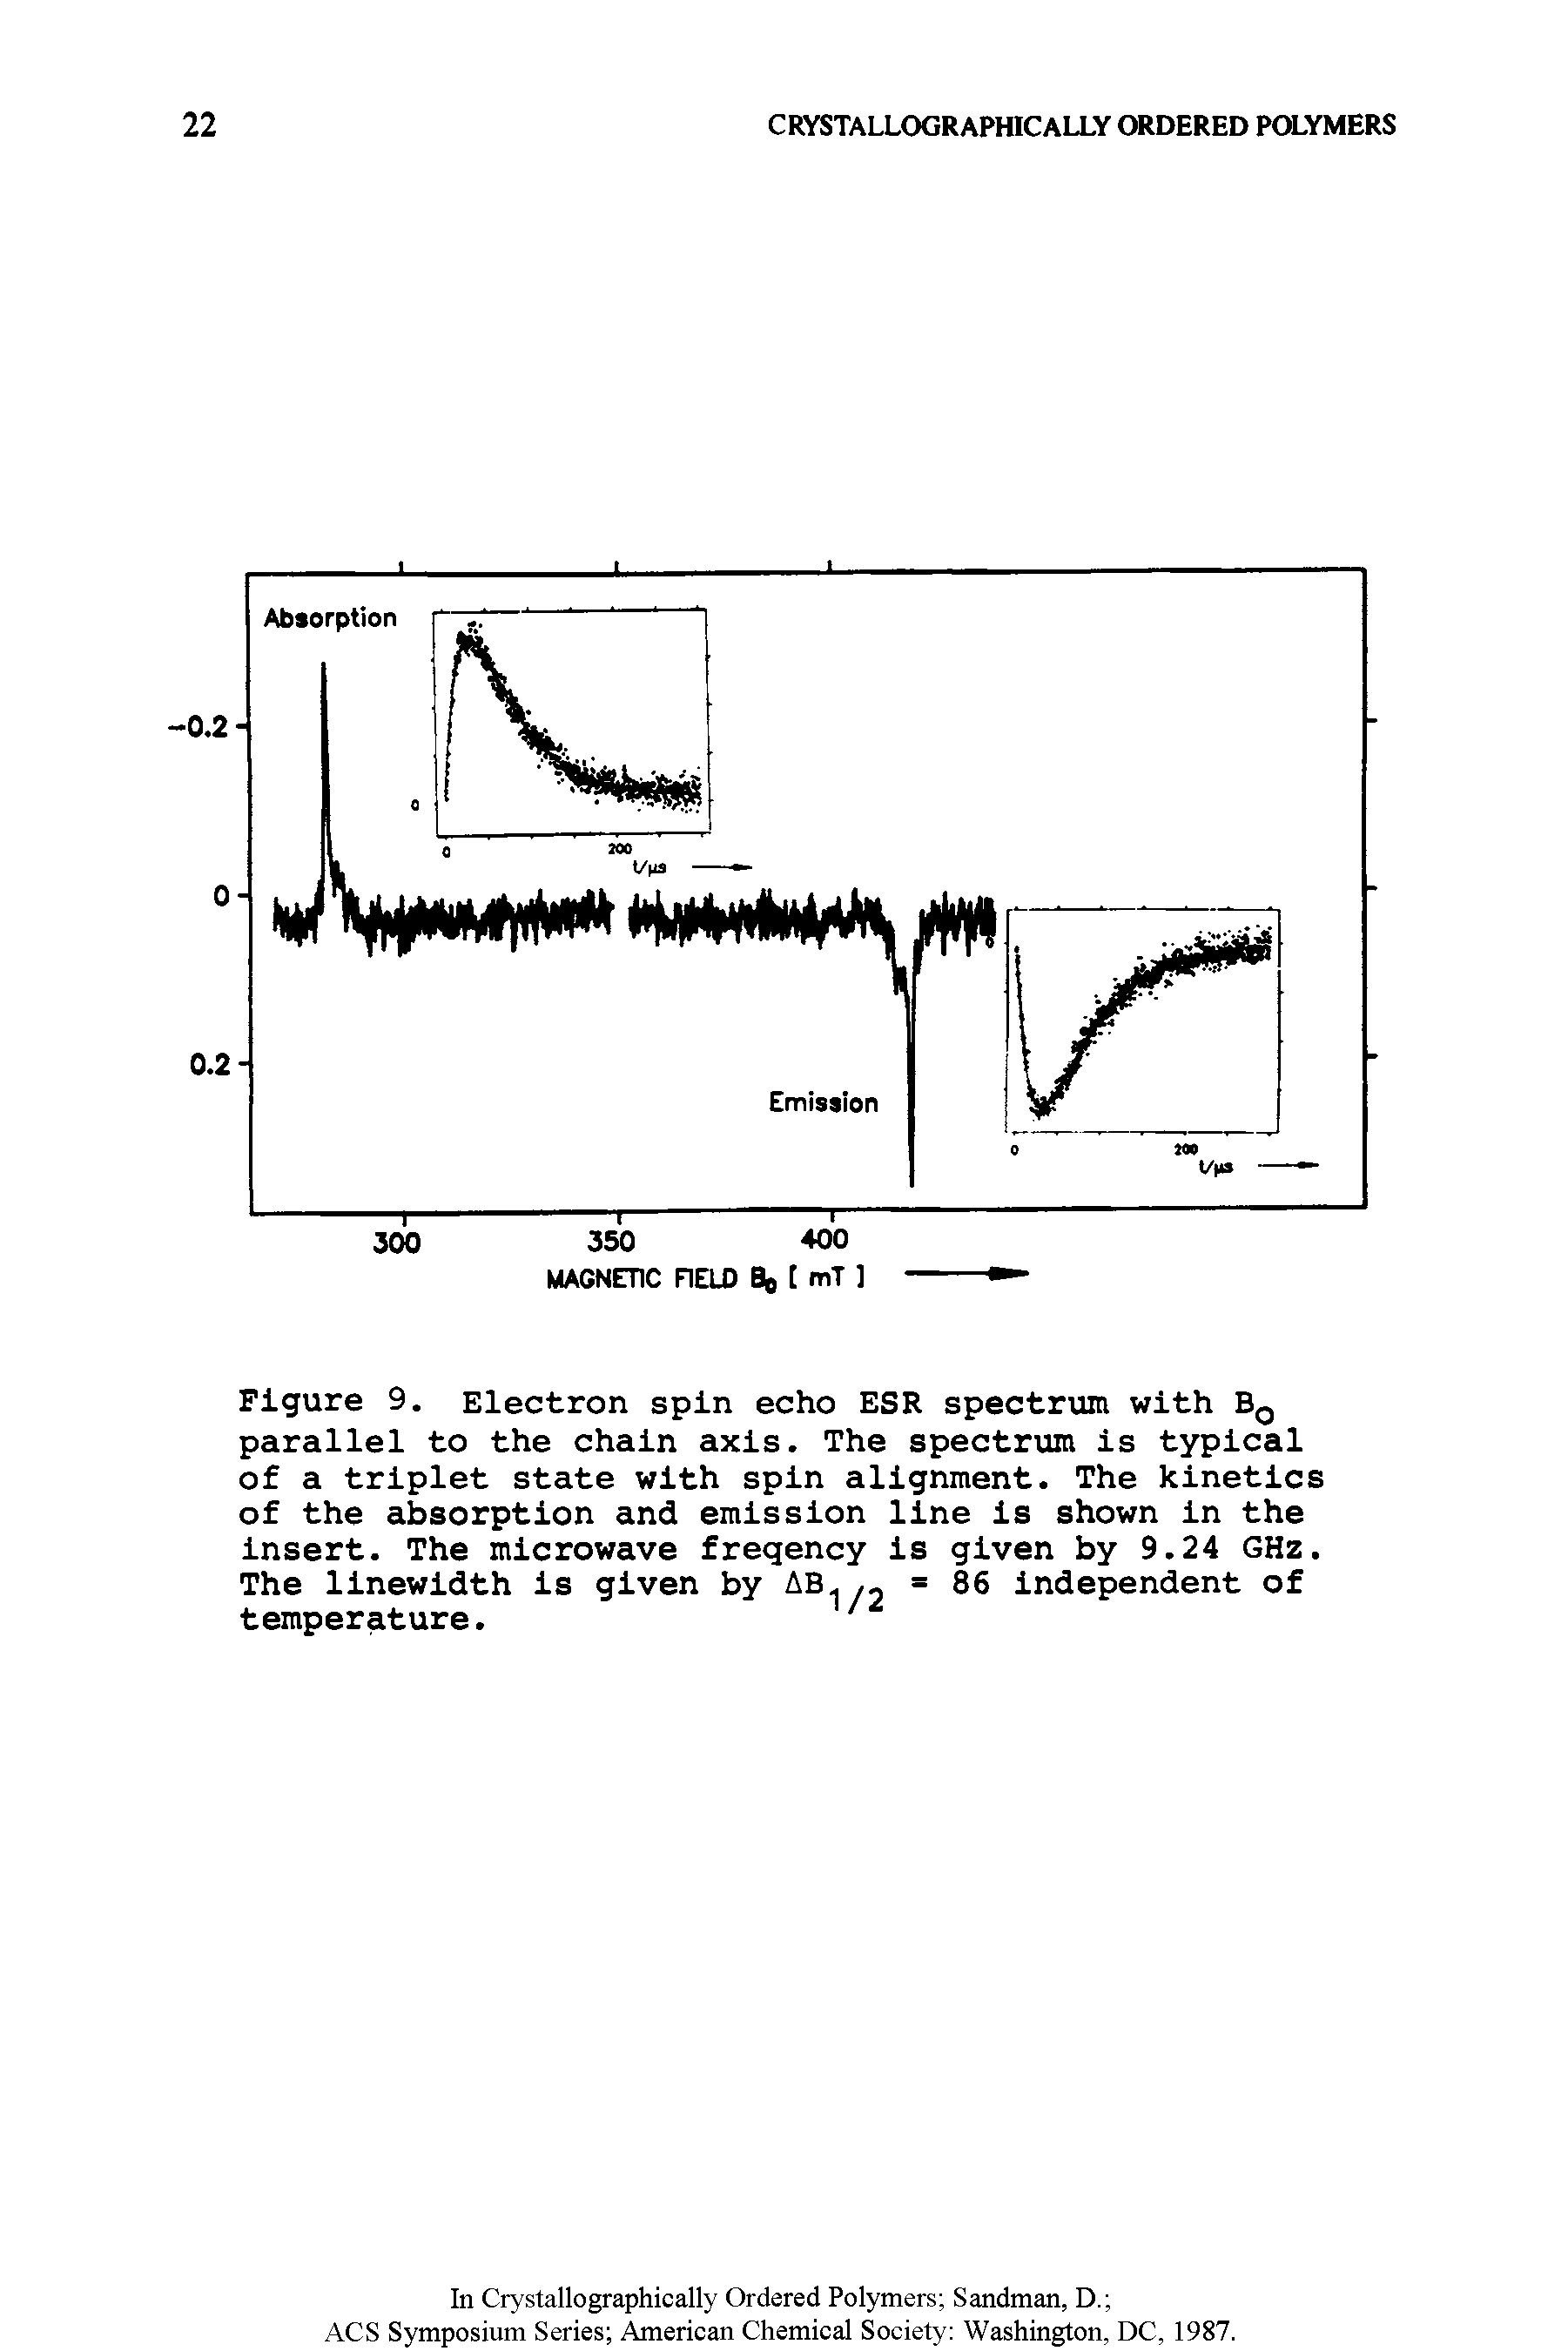 Figure 9. Electron spin echo ESR spectrvim with Bq parallel to the chain axis. The spectrum is typical of a triplet state with spin alignment. The kinetics of the absorption and emission line is shown in the insert. The microwave fregency is given by 9.24 GHz. The linewidth is given by independent of...